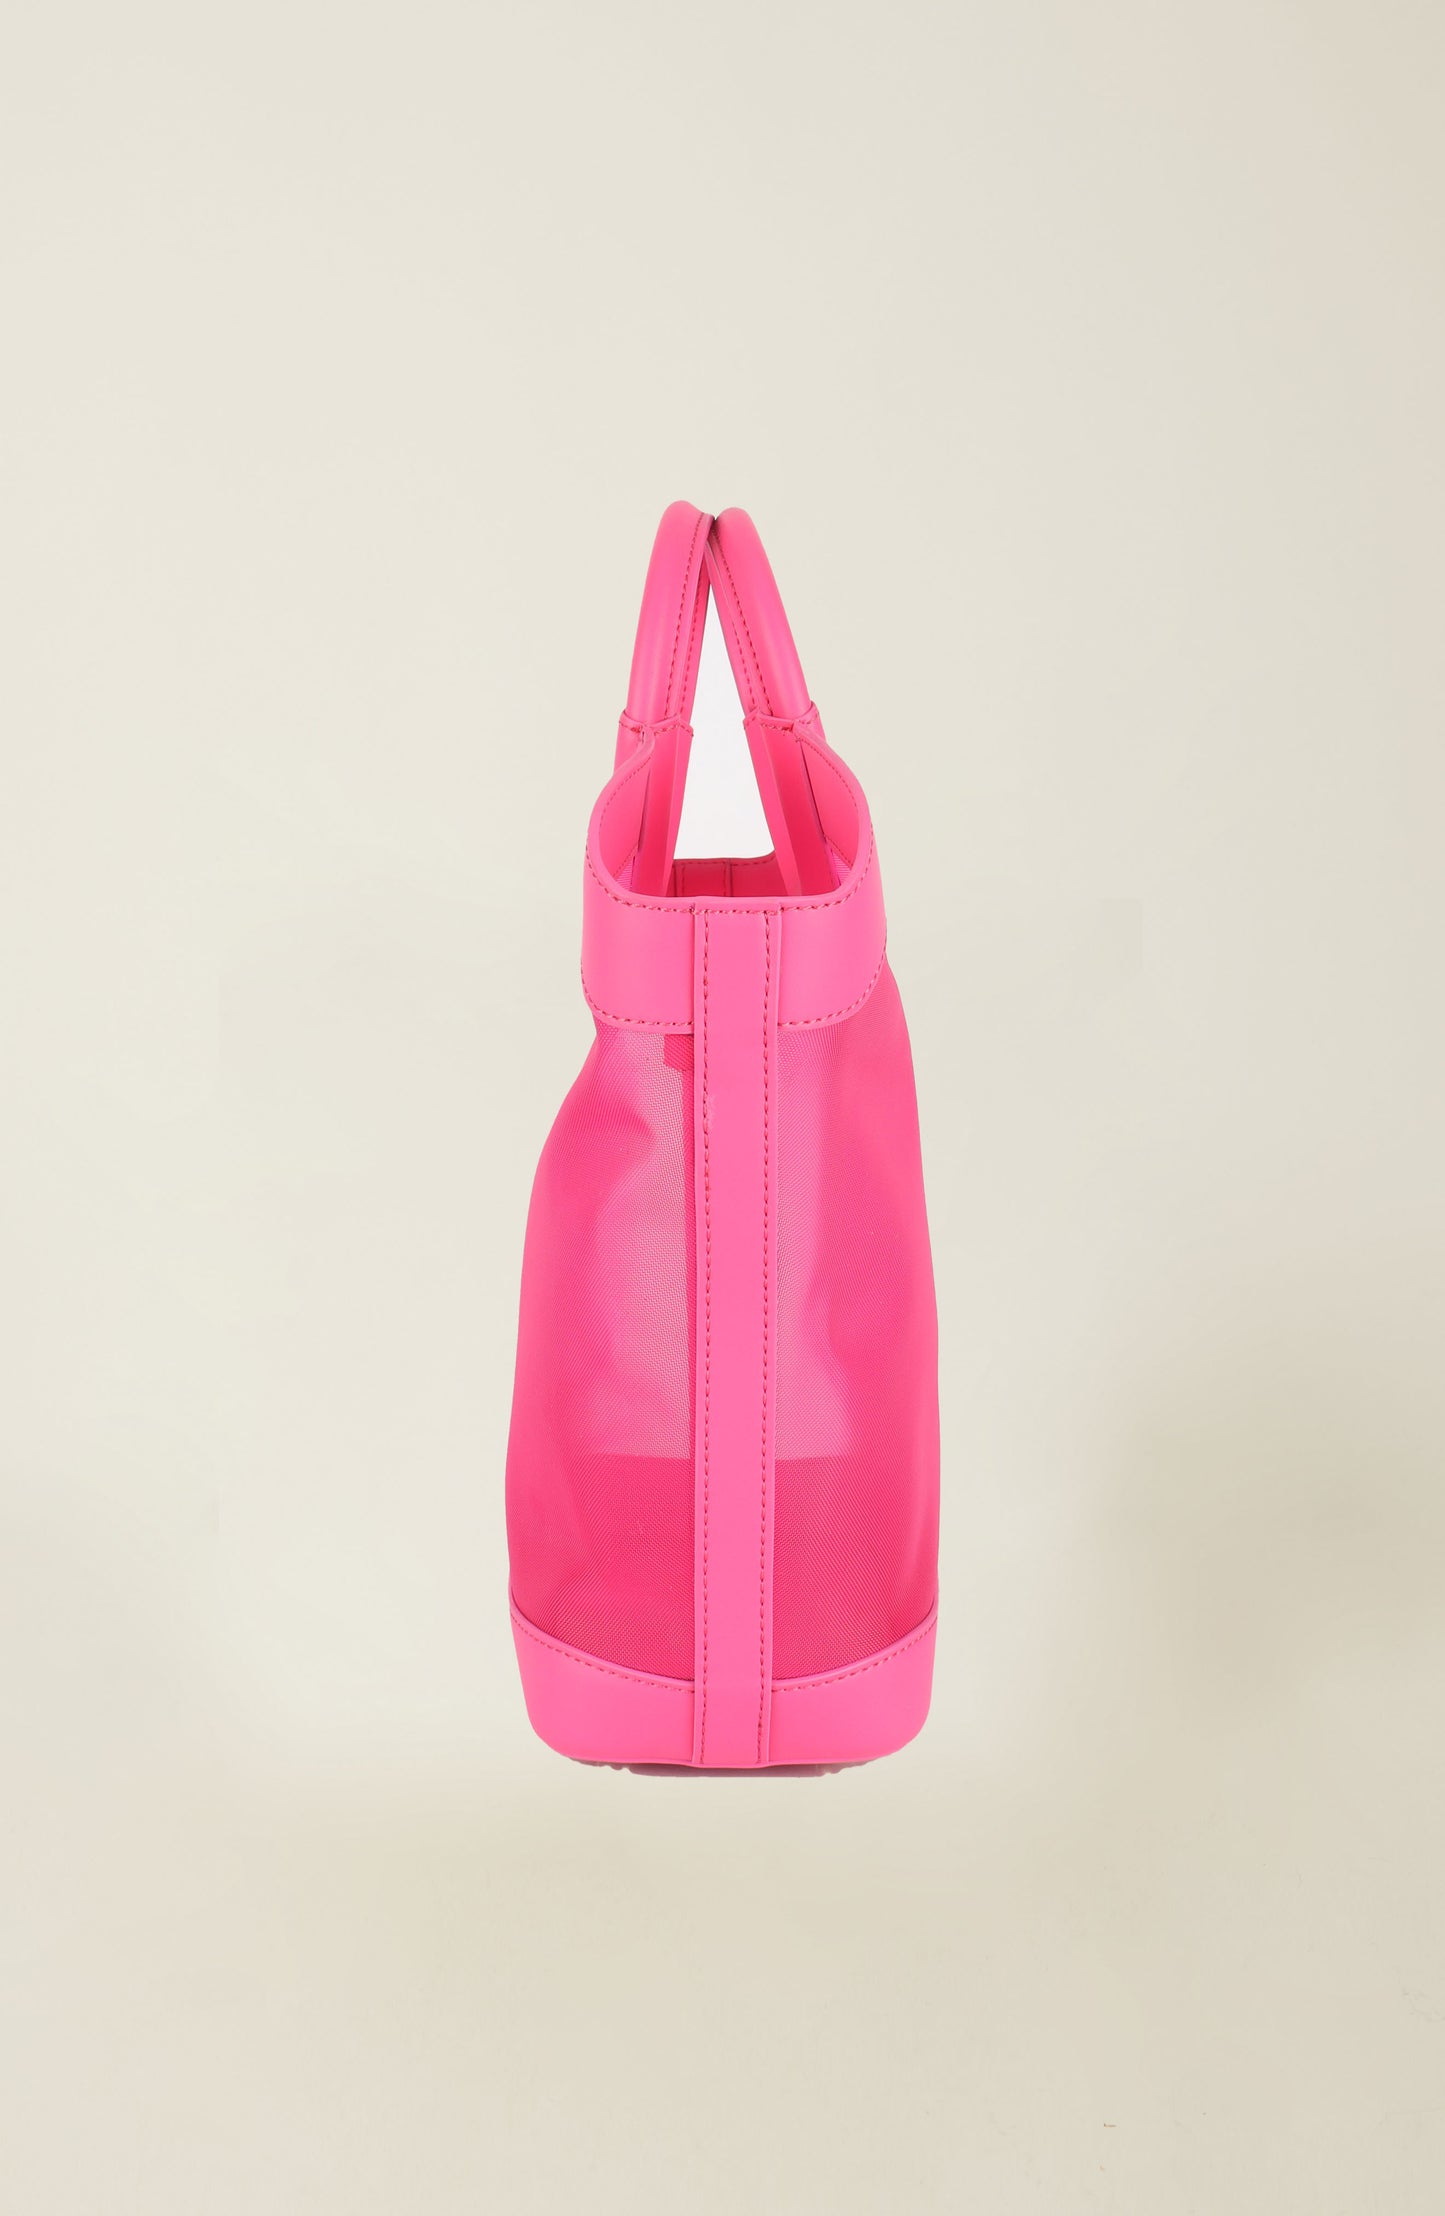 Tory Tote Hot Pink PRE-ORDER SHIPS 6/1 -6/30